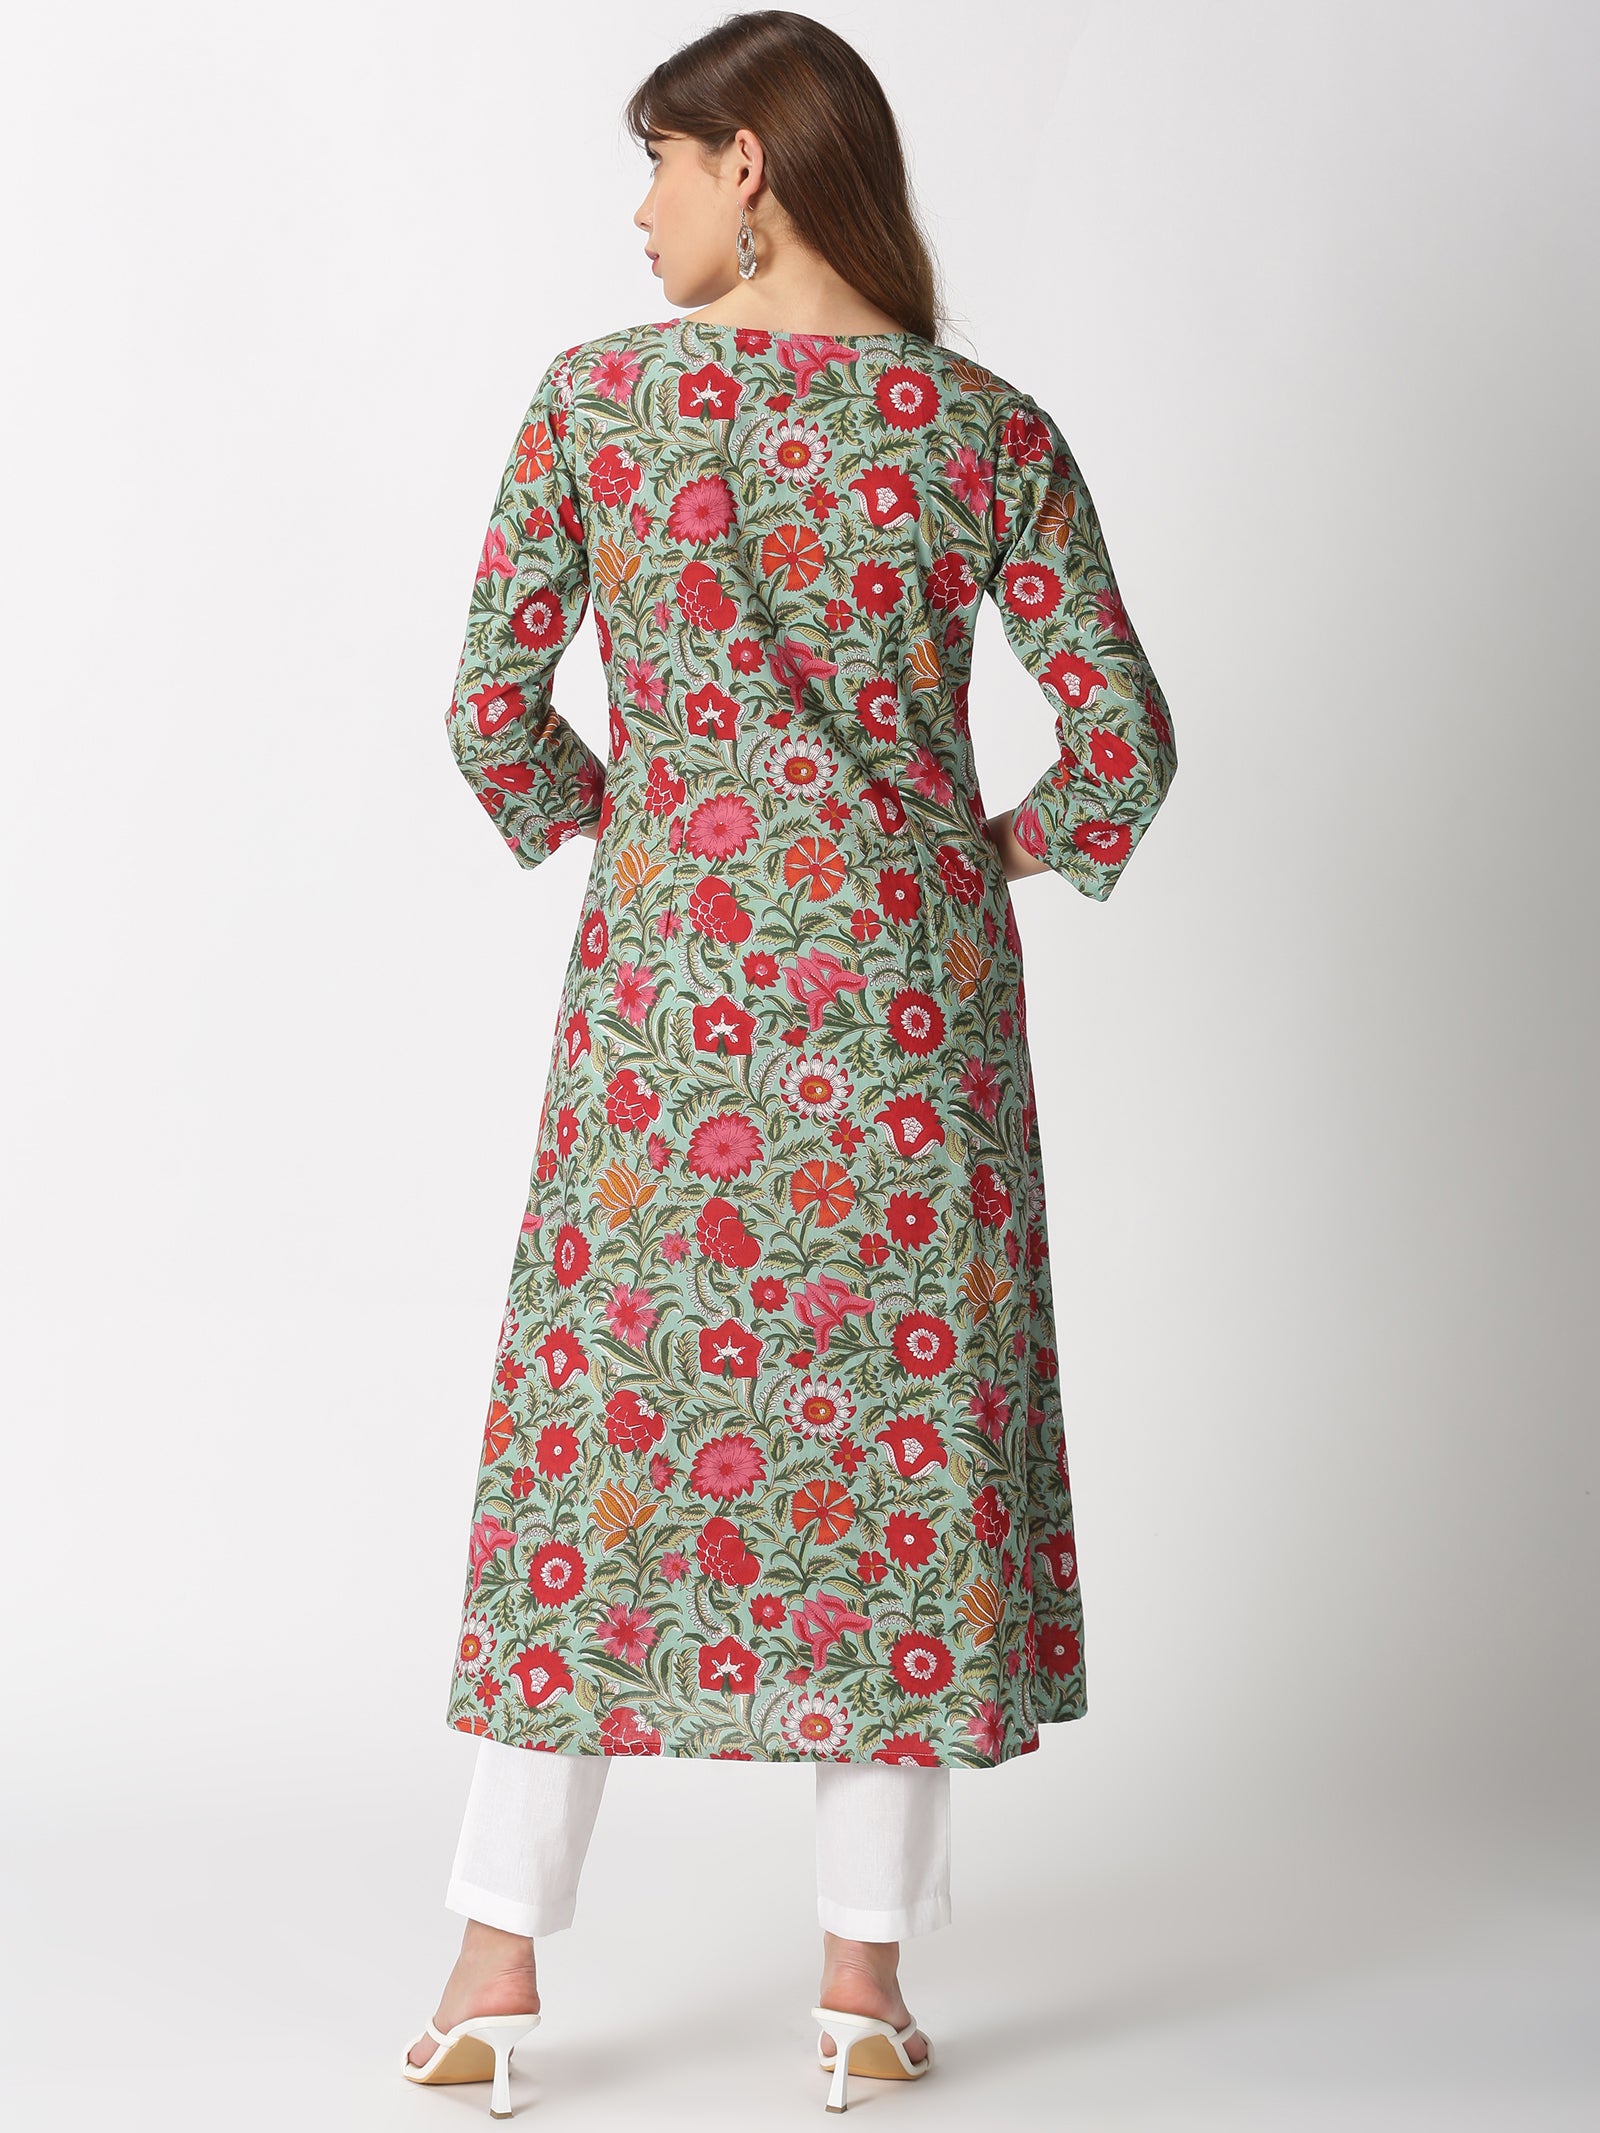 Turquoise Blue Cotton Floral Printed A-line Kurta with Lucknowi Chikankari Embroidered Neck